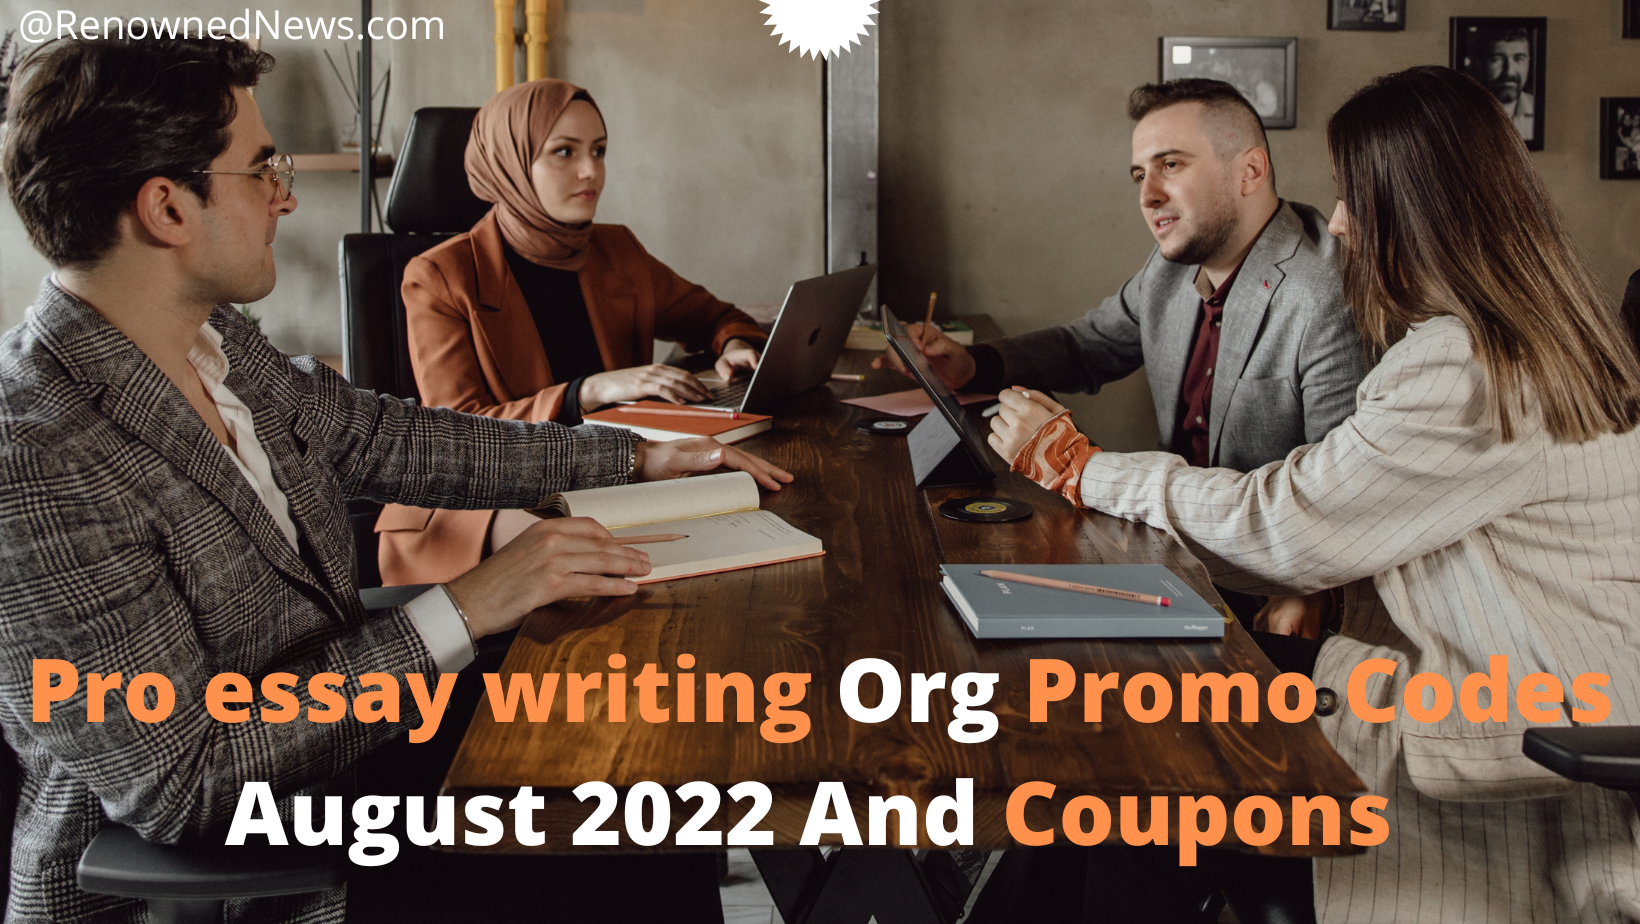 Proessaywriting Org Promo Codes August 2022 And Coupons